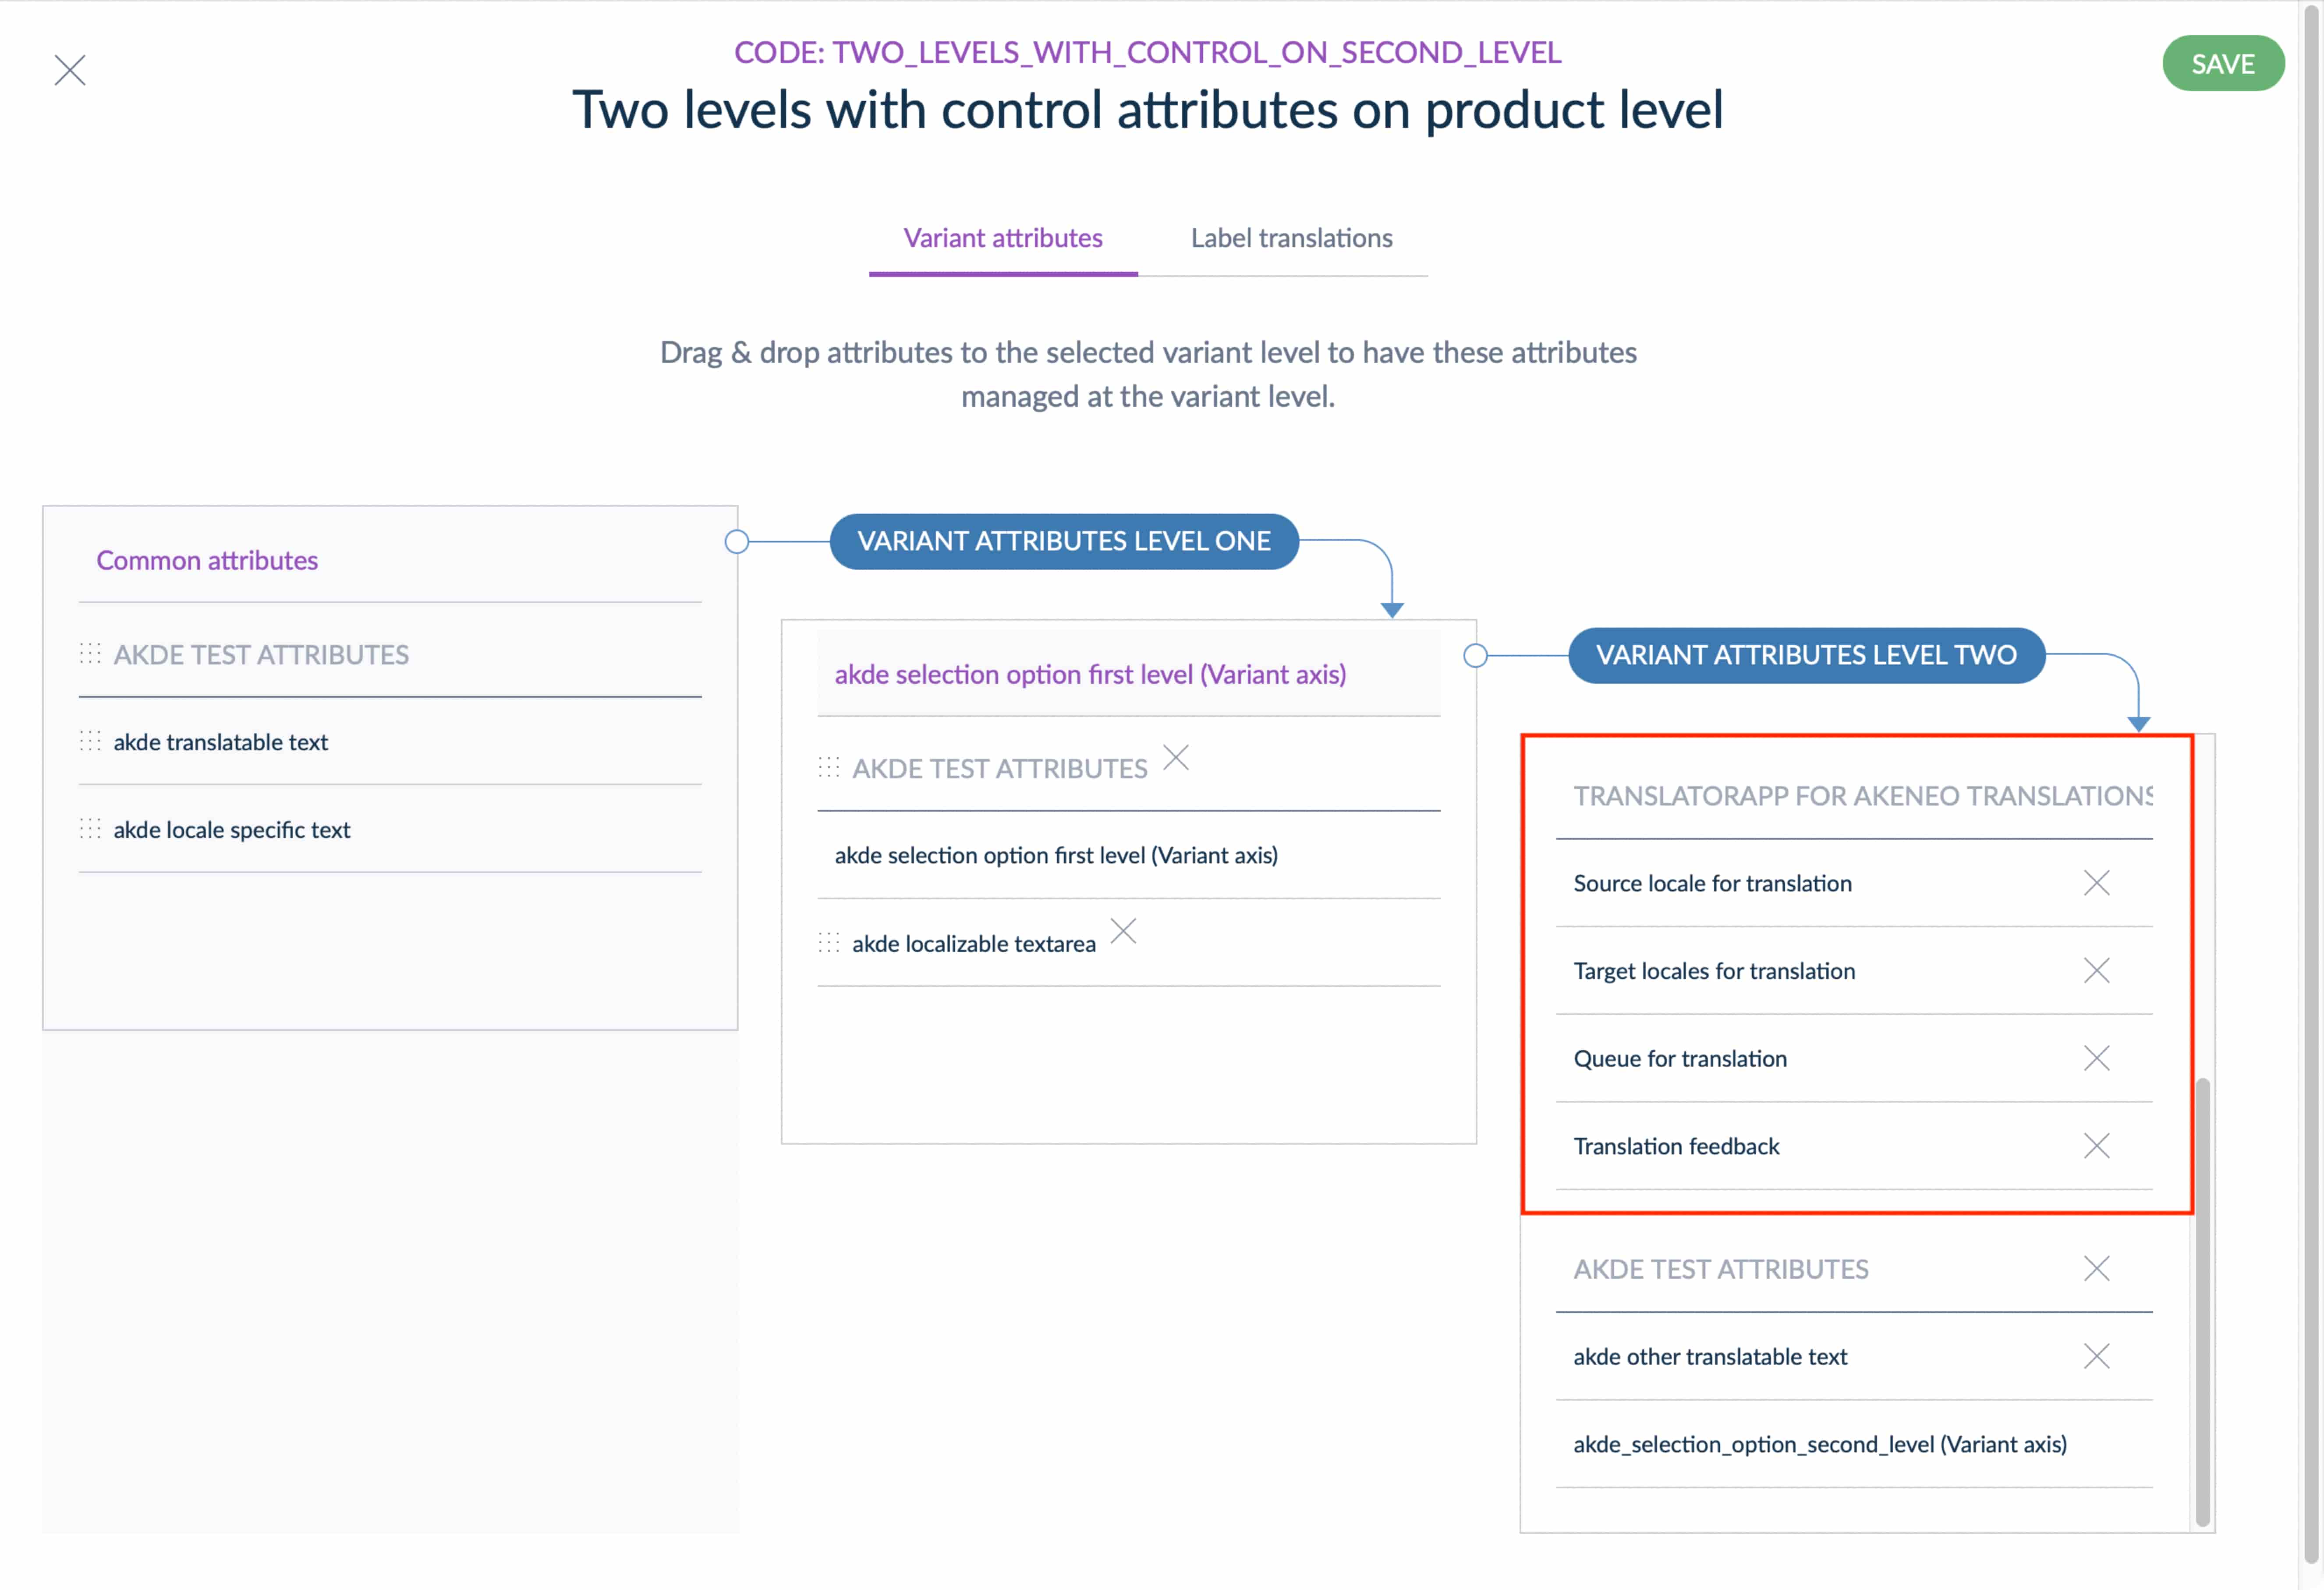 Control attributes on product level